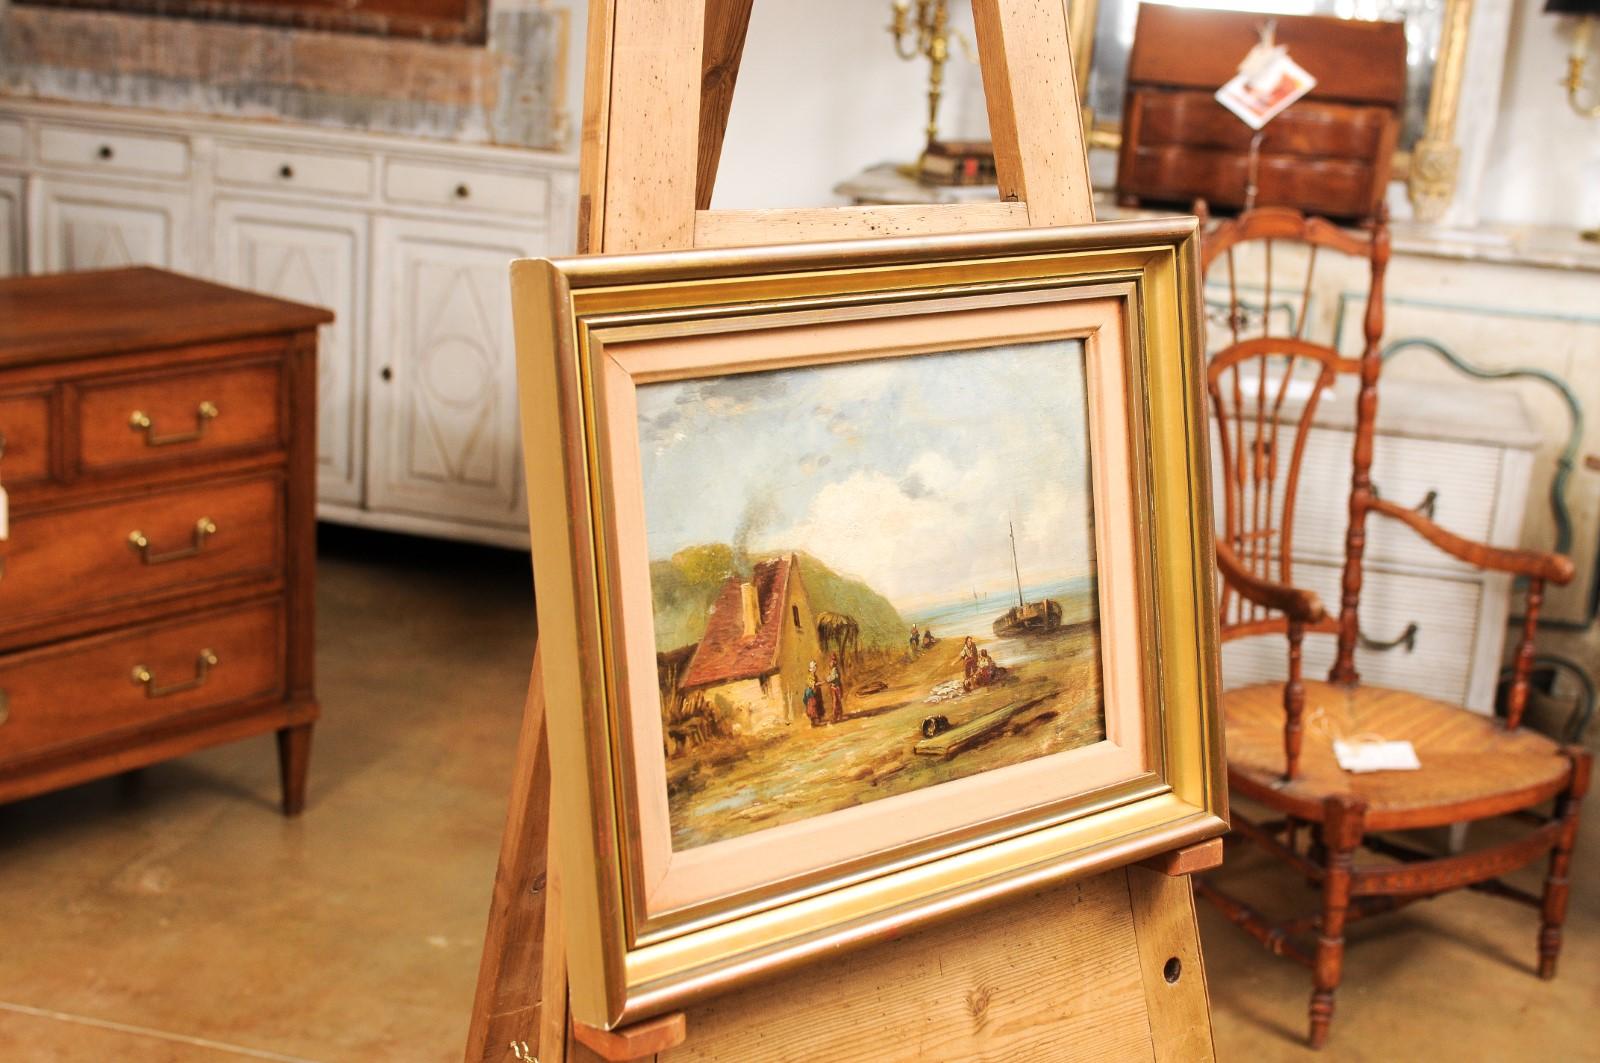 French 19th Century Framed Oil On Panel Painting Depicting a Village by the Sea For Sale 4